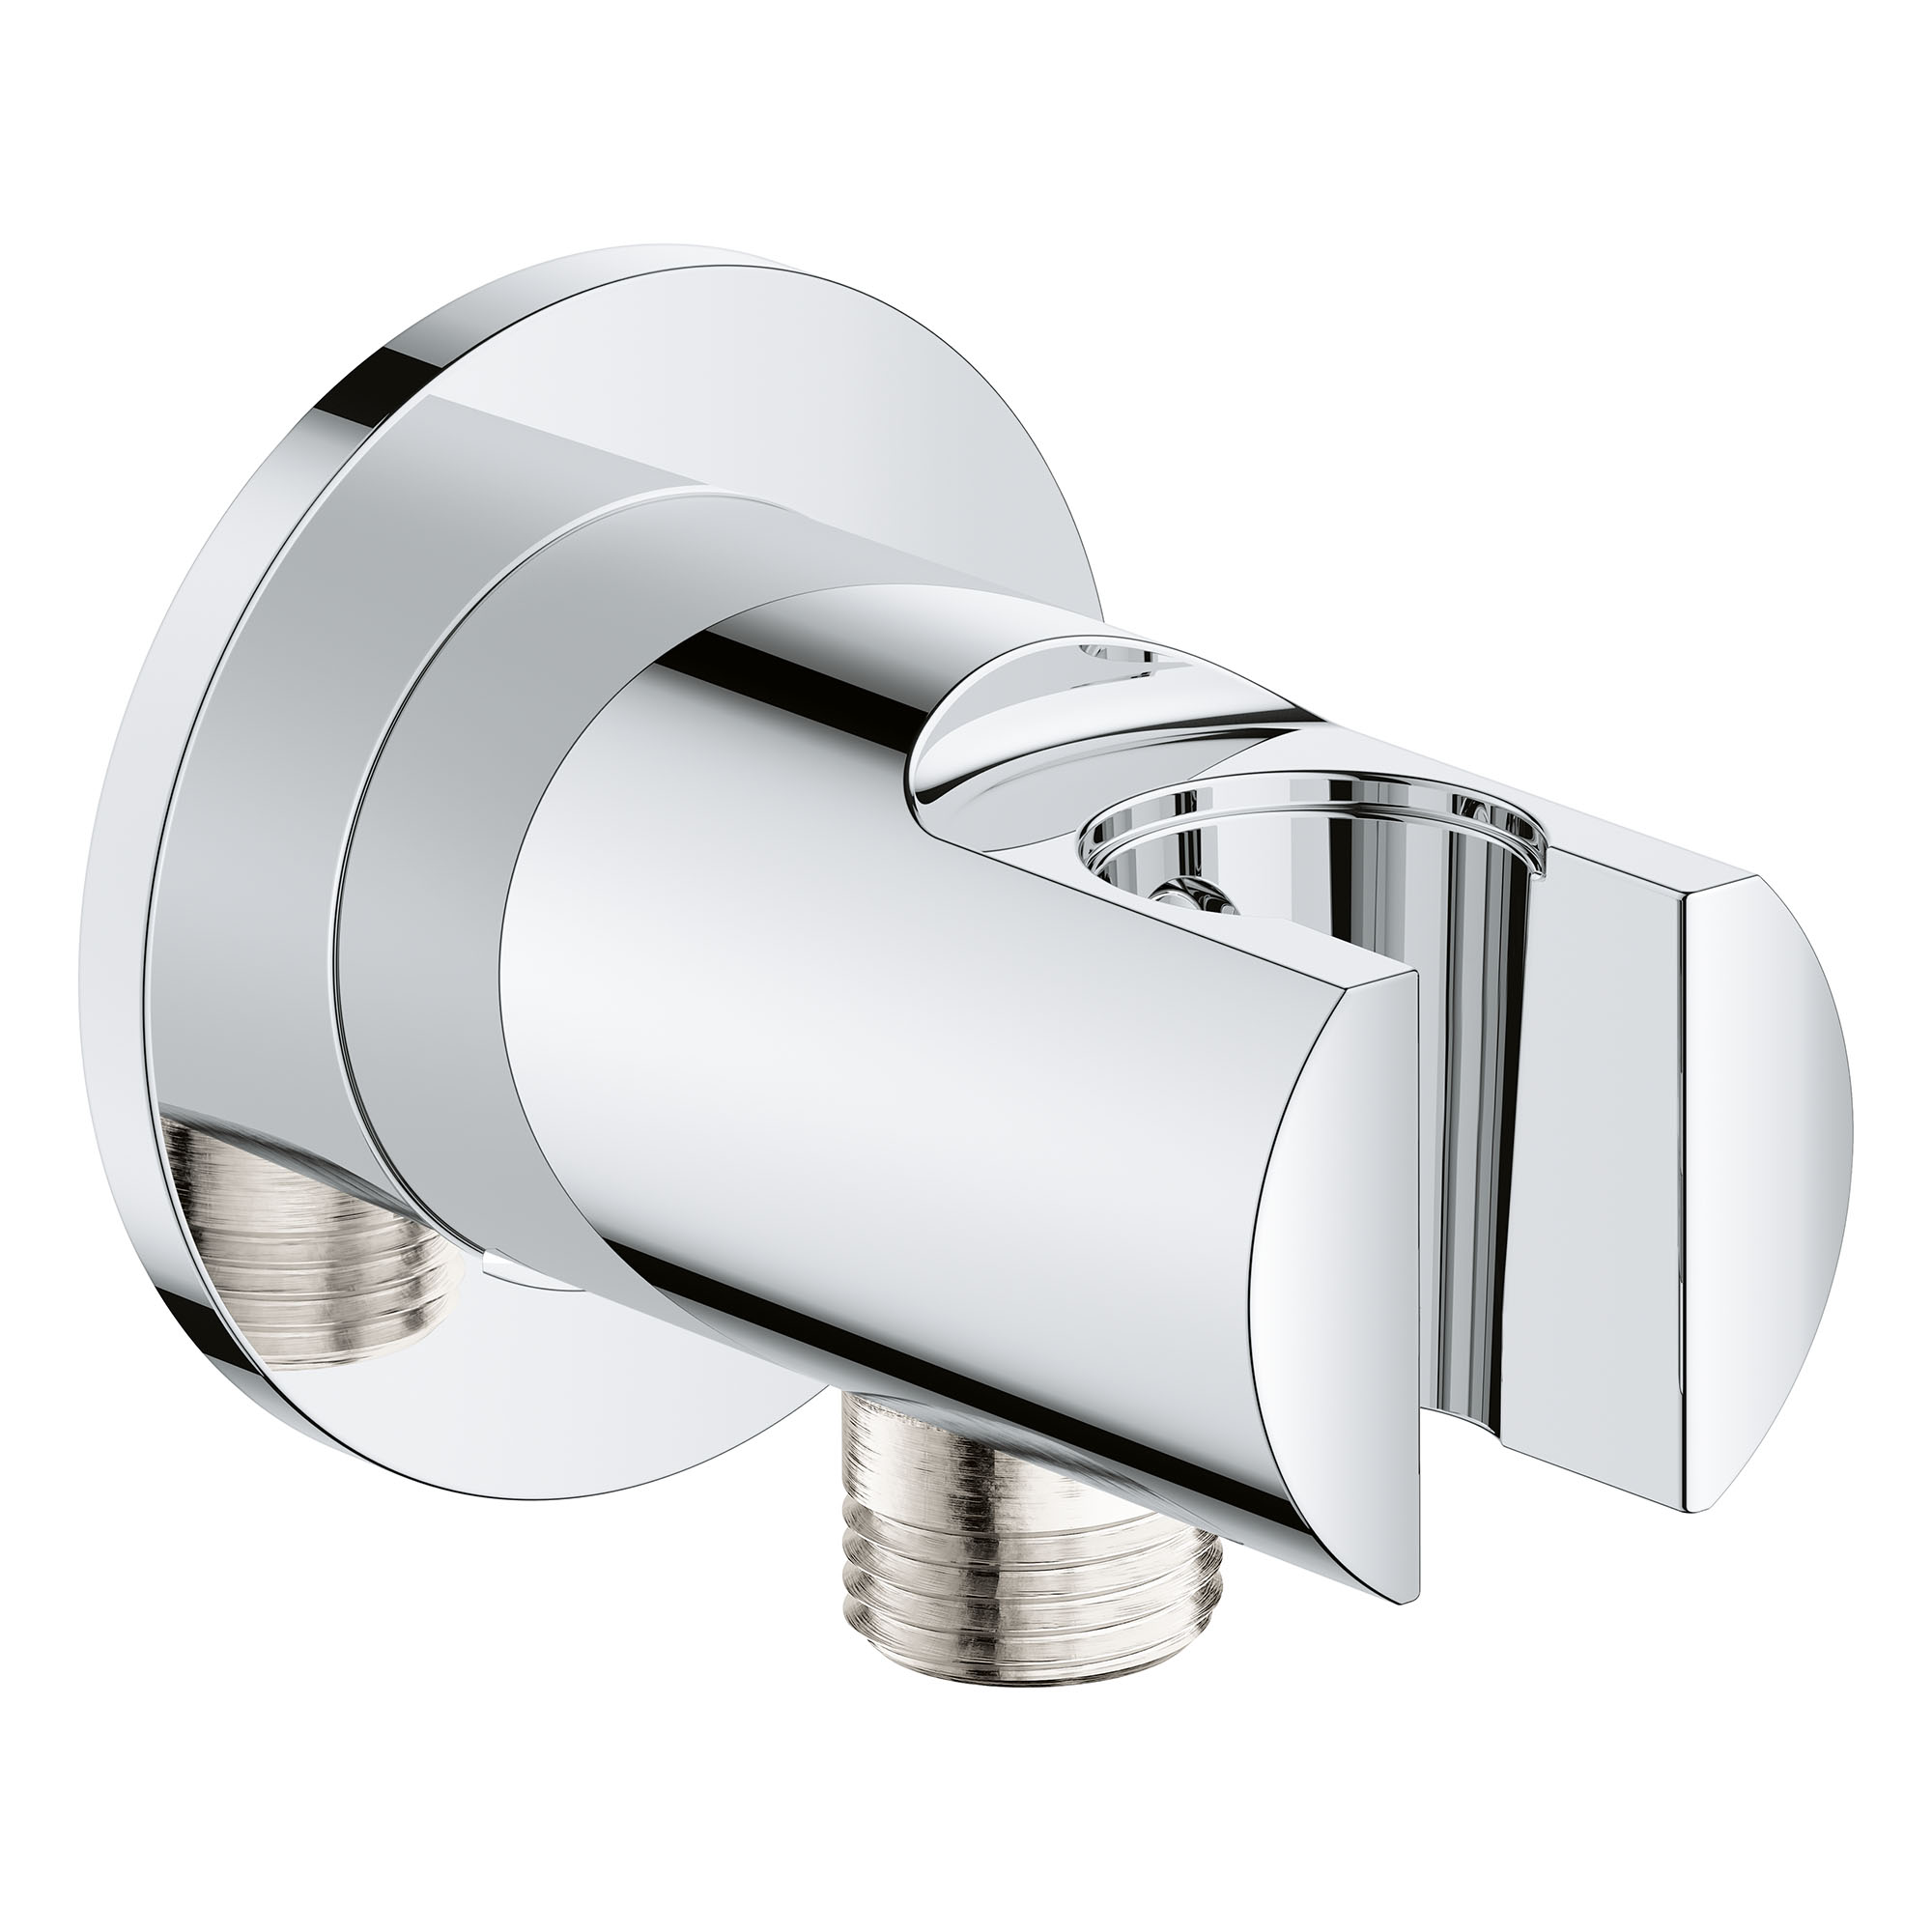 hansgrohe Accessoires: Unica, Repose-pied Comfort, N° article 26329000